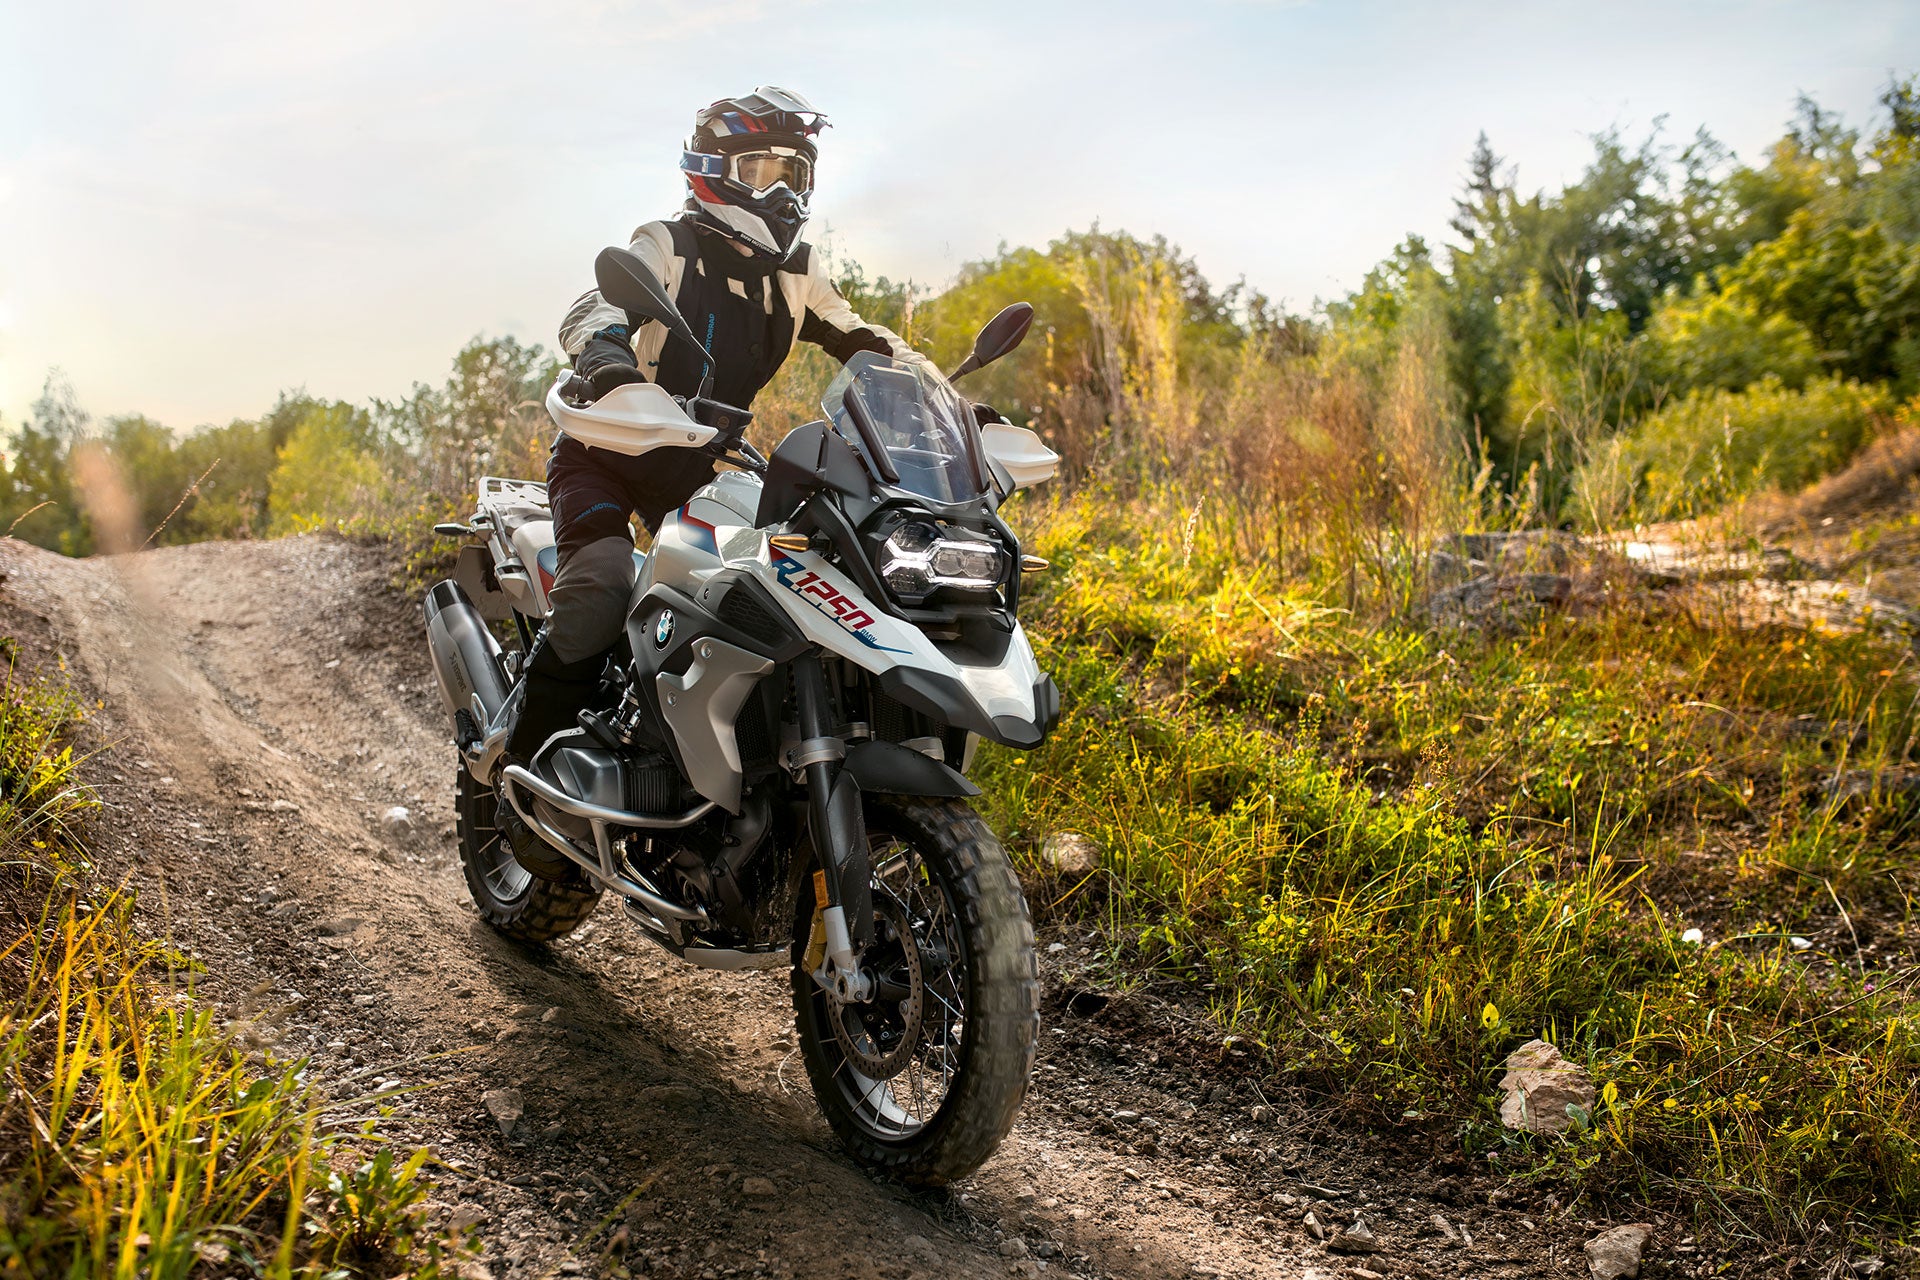 2023 m. BMW R 1250 GS nuotykis